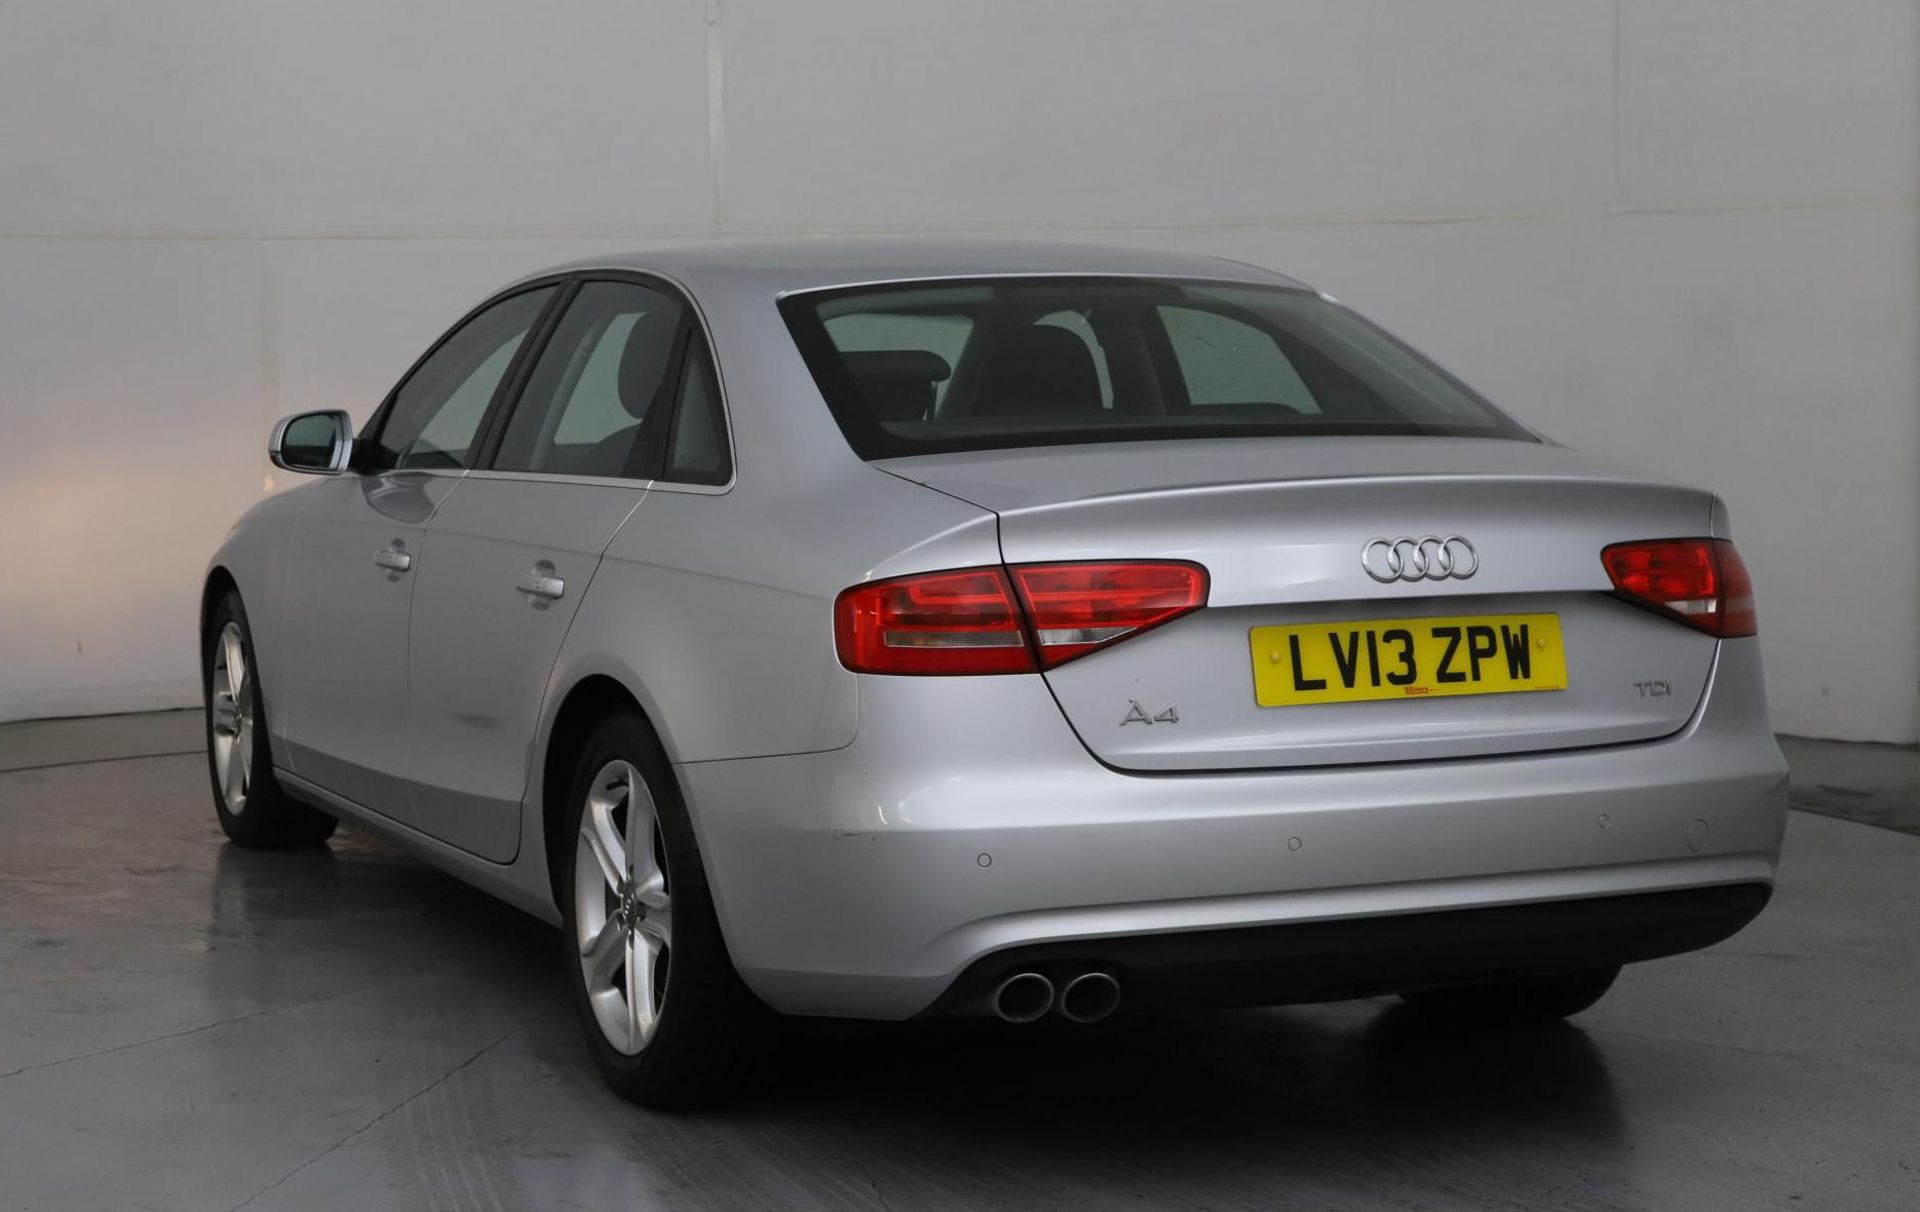 2013 Audi A4 2.0 Tdi SE 4 Door Saloon - CL505 - NO VAT ON THE HAMMER - Location: Corby - Image 7 of 12